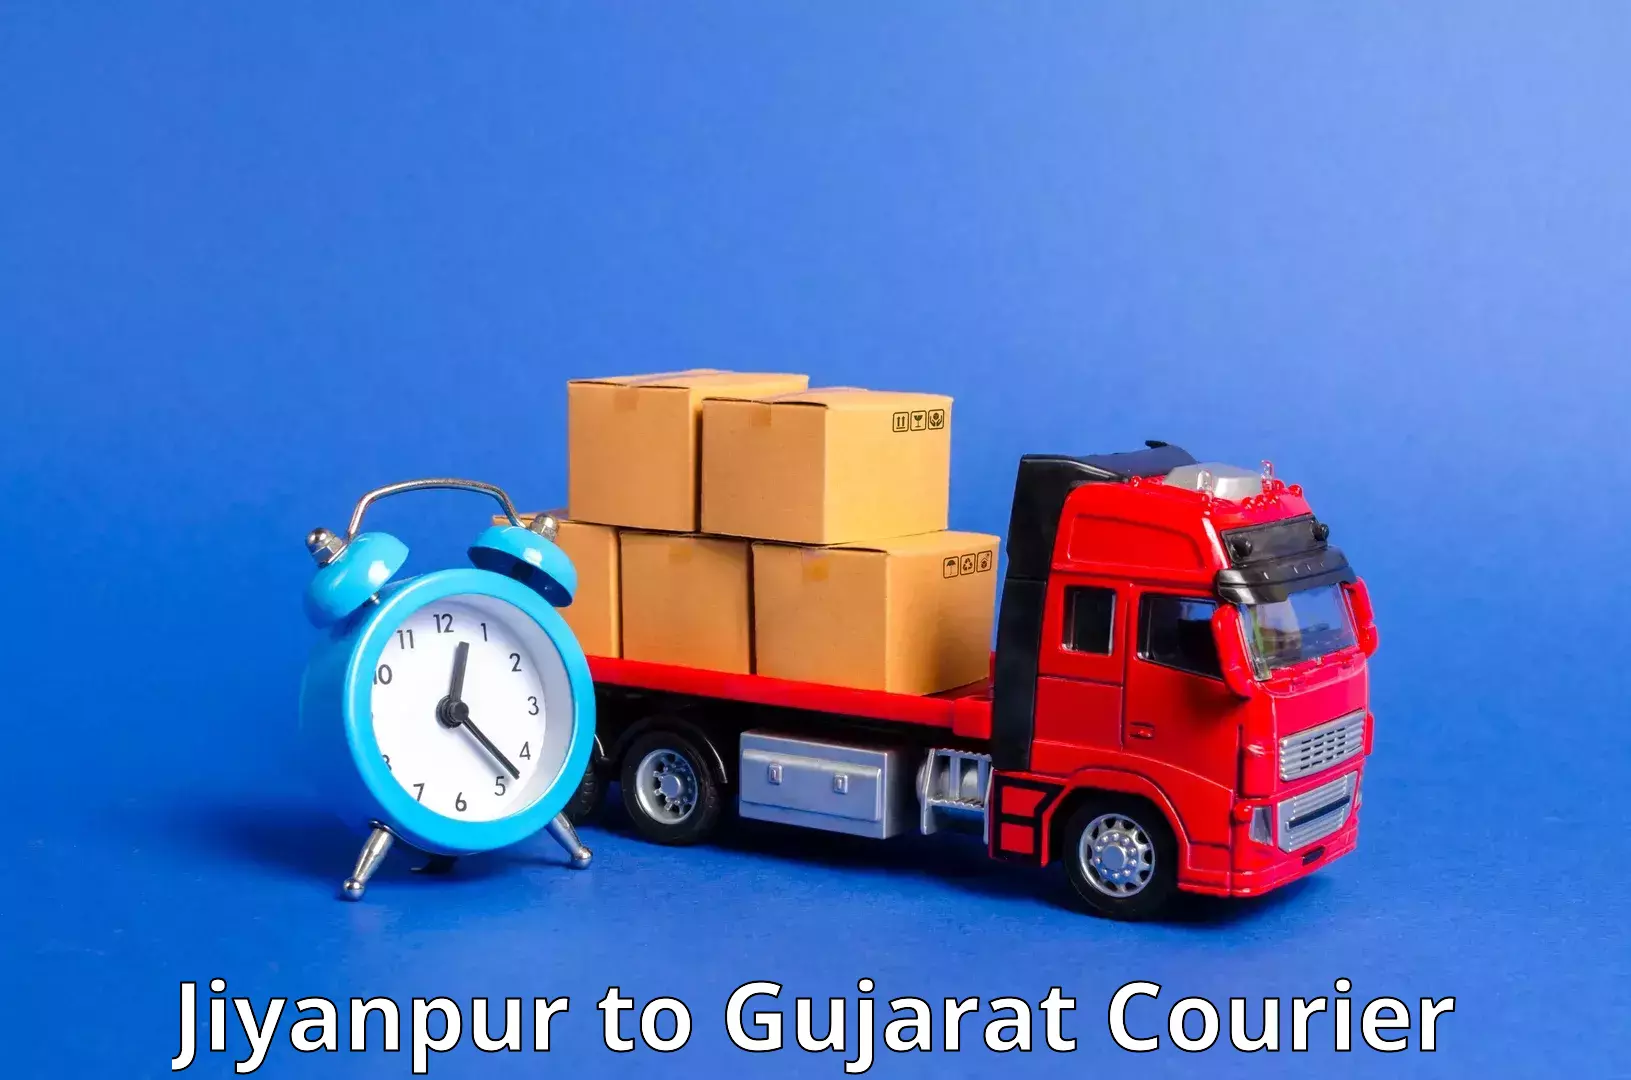 User-friendly courier app Jiyanpur to Jhagadia